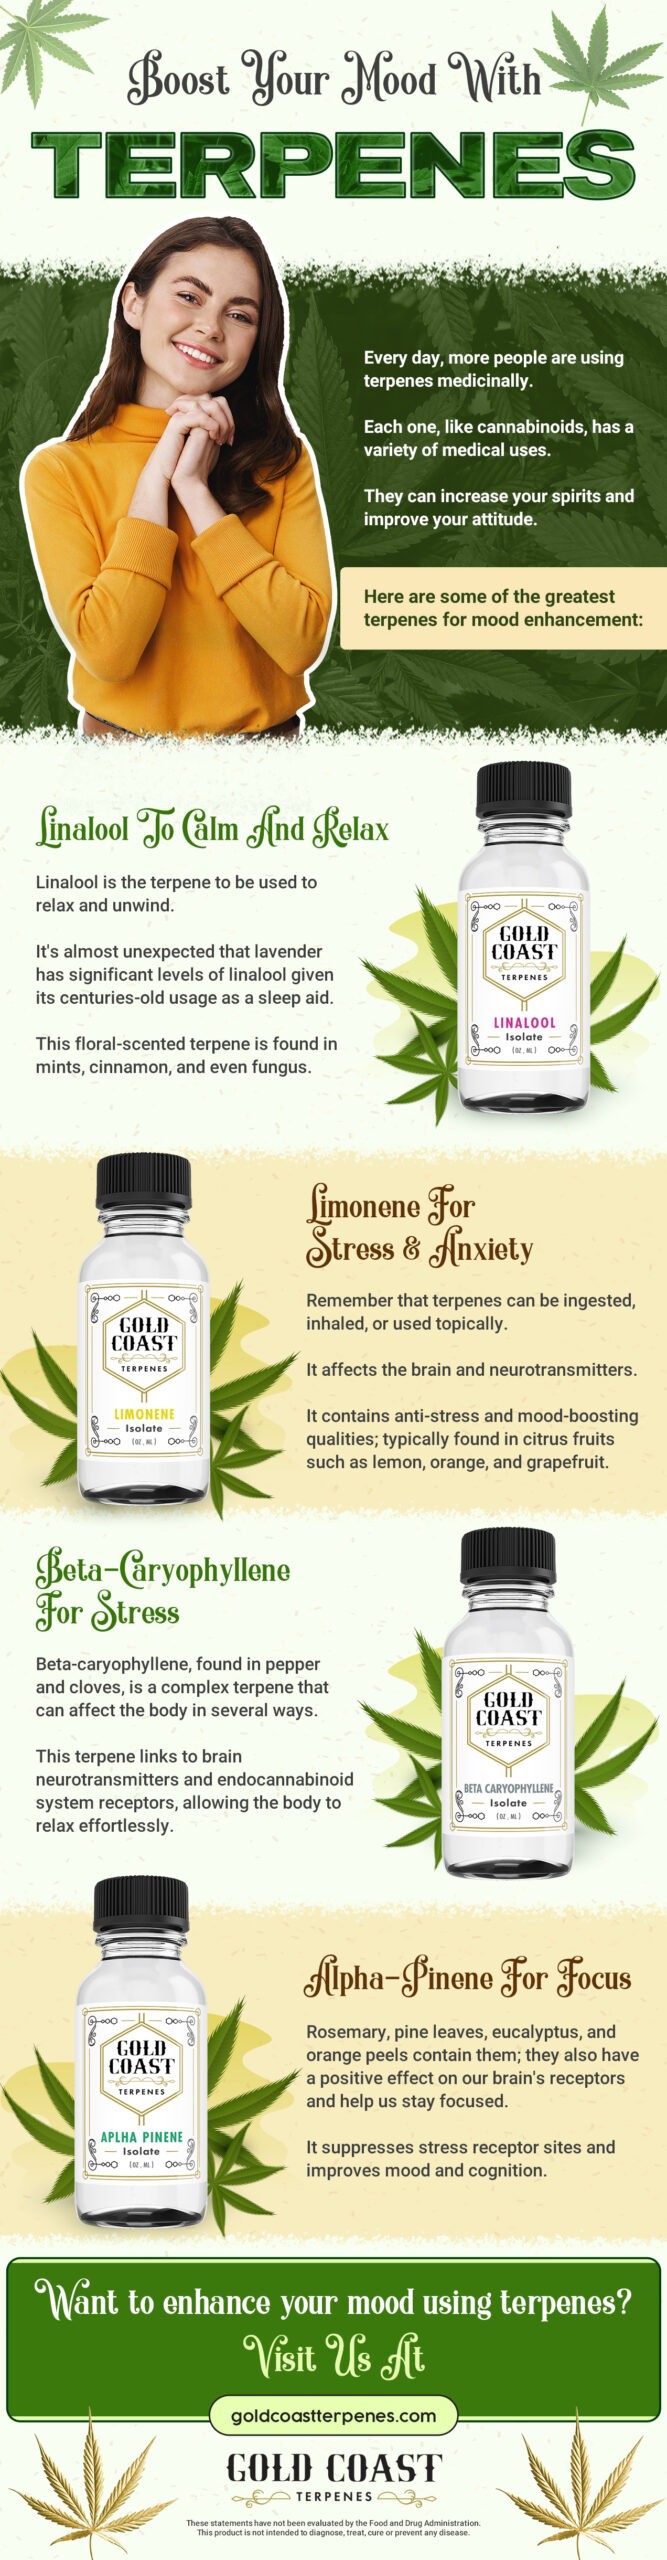 Boost Your Mood With Terpenes